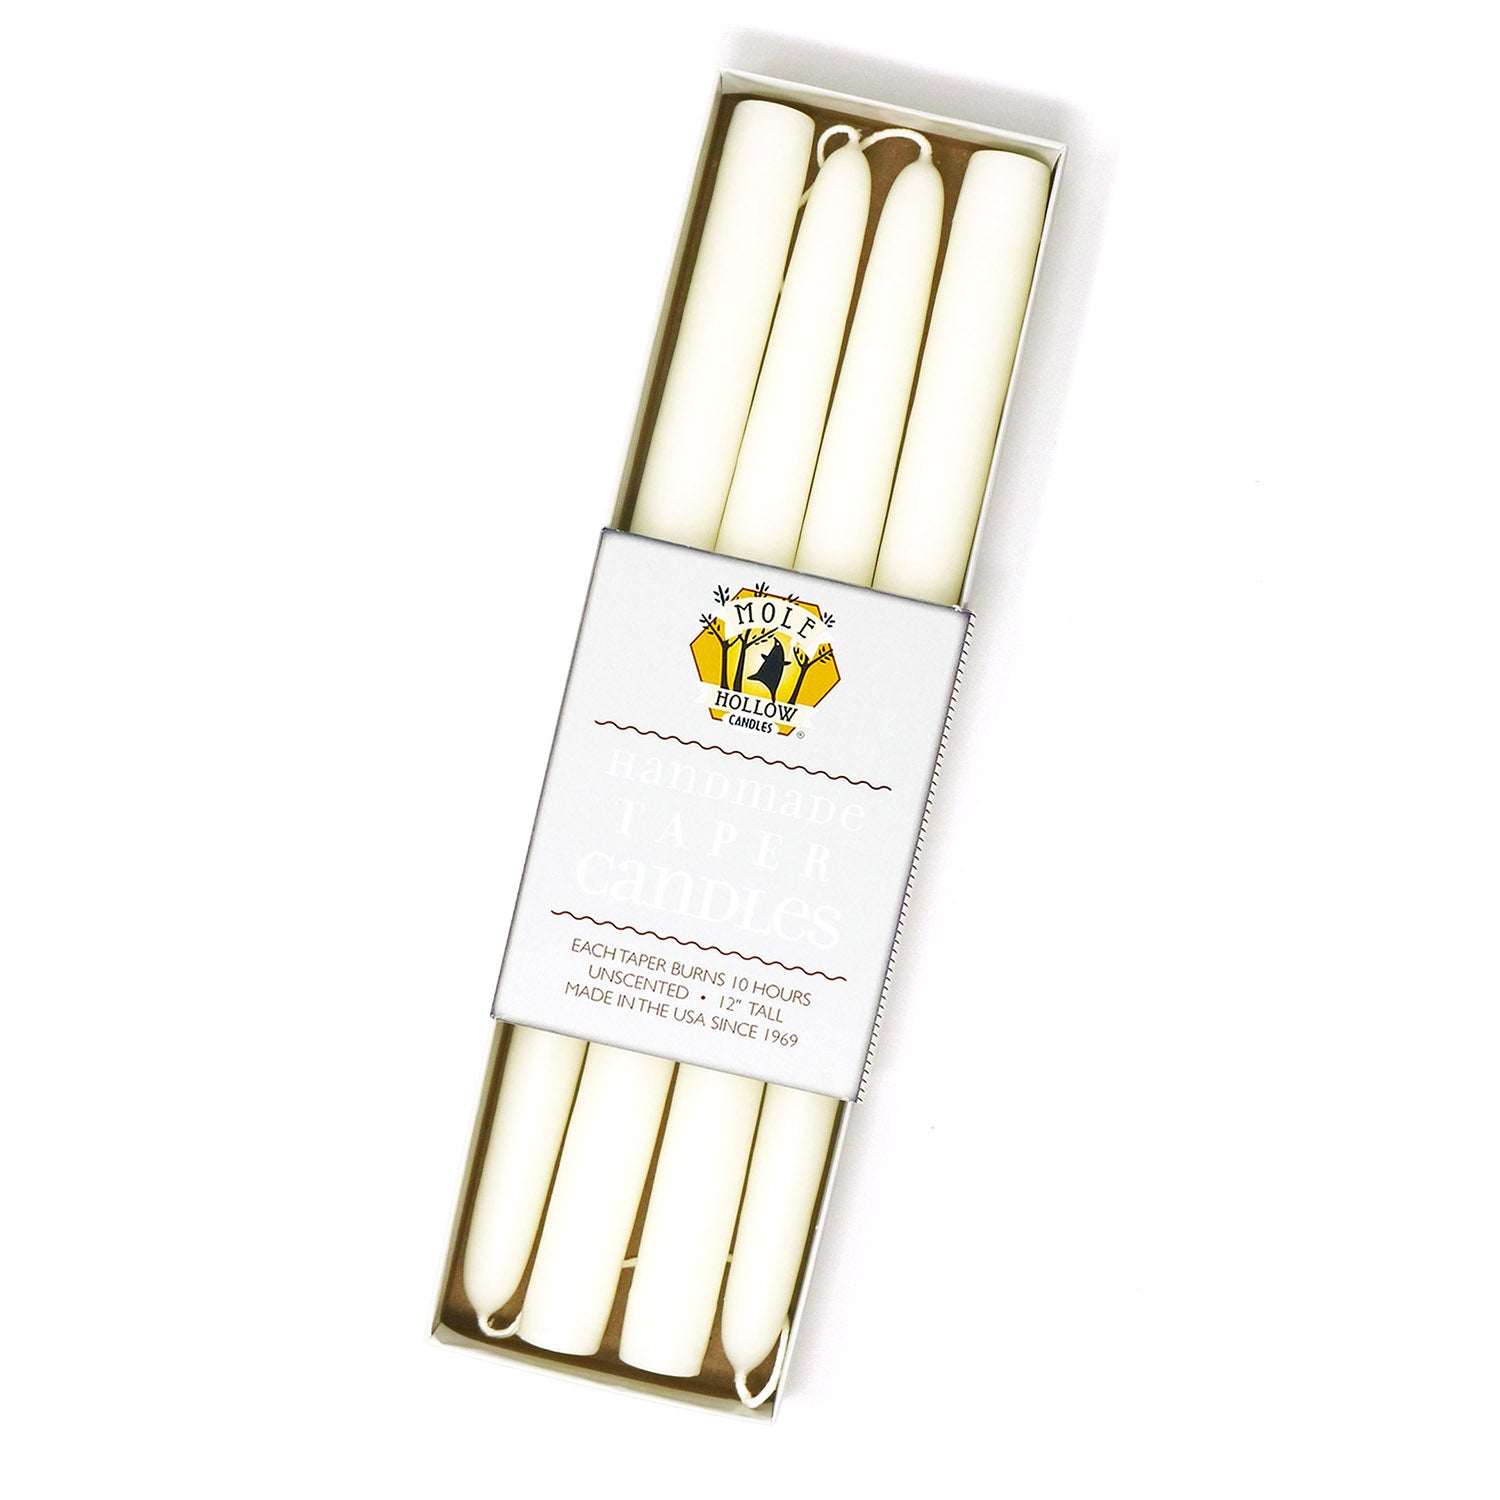 12" Ivory Beeswax Taper Candles, Set of 4